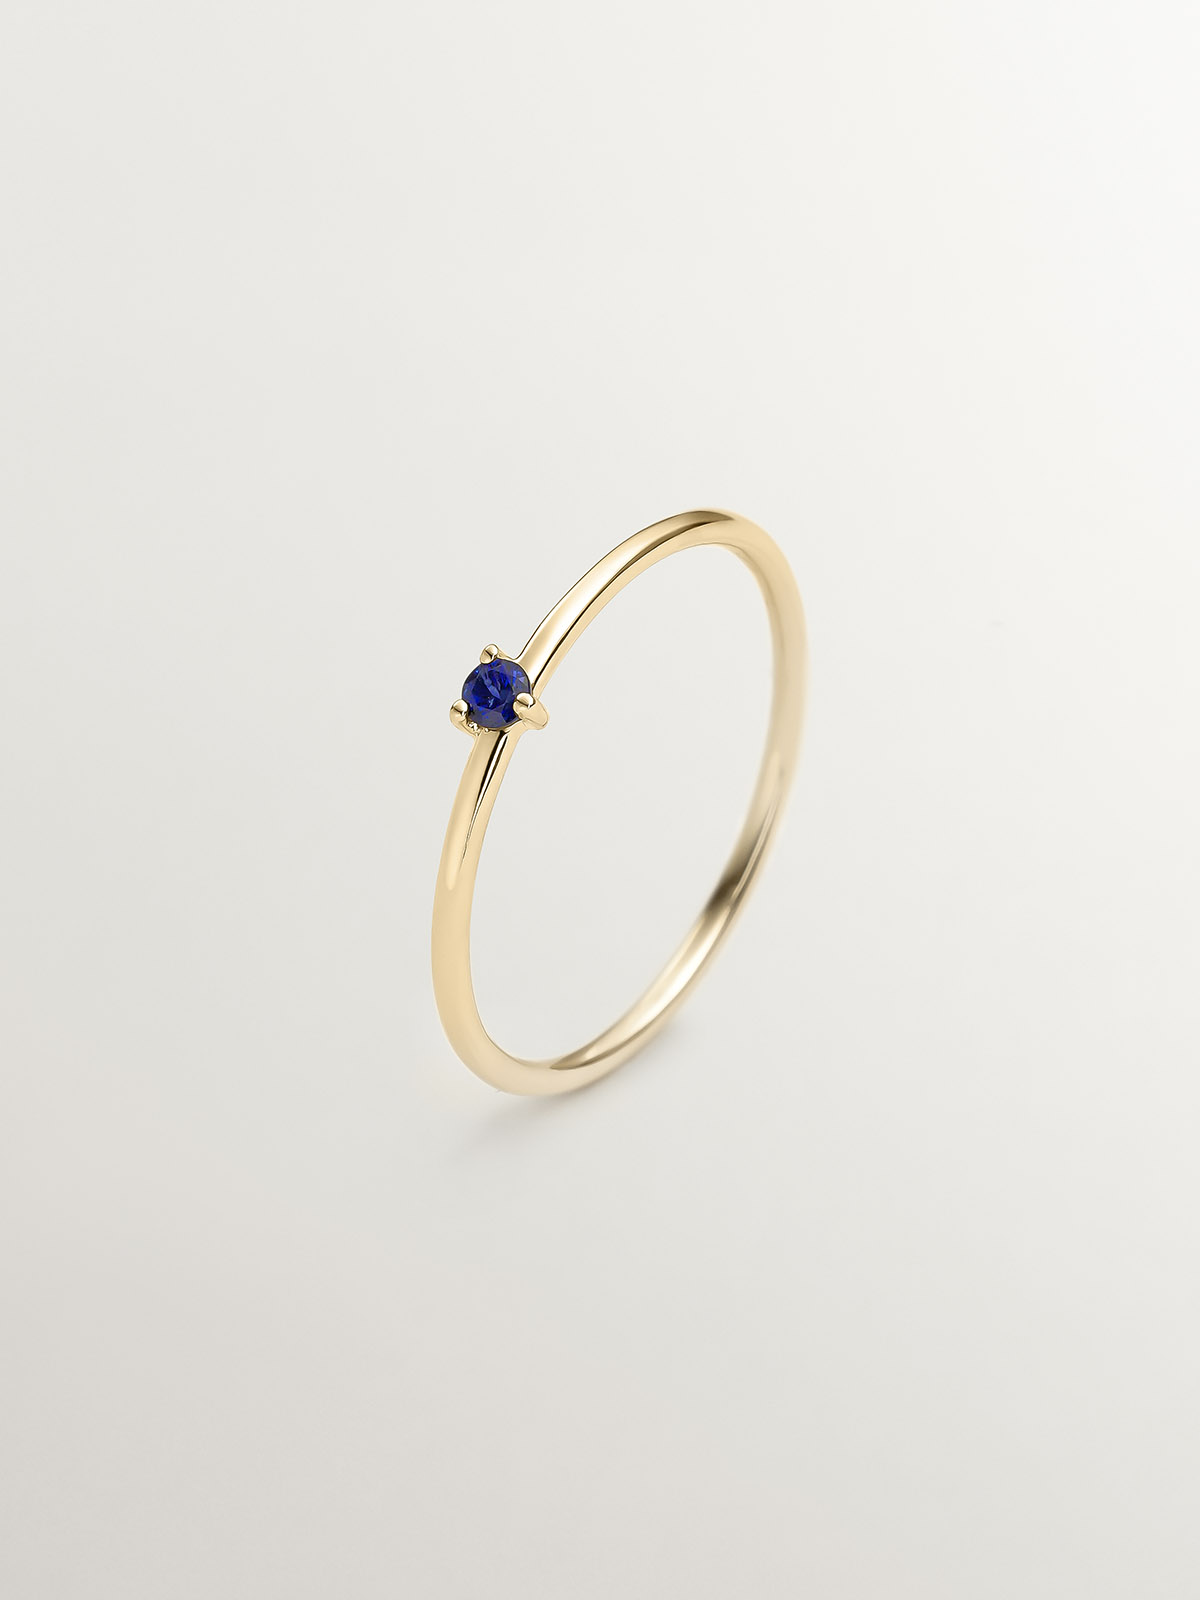 9K yellow gold solitaire ring with blue sapphire